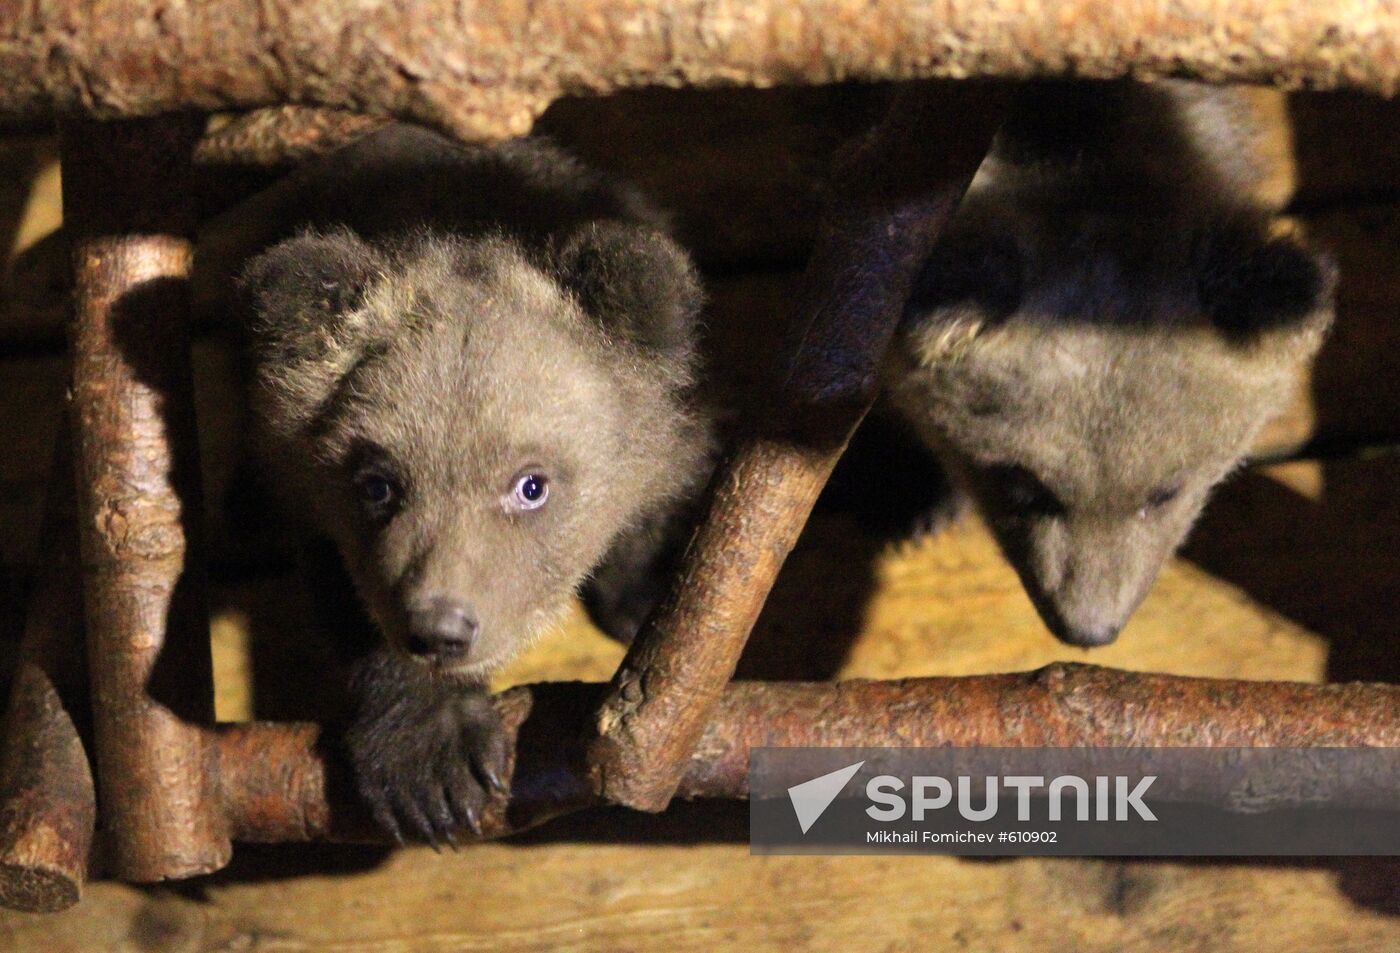 IFAW project on rehabilitation of orphaned bear cubs